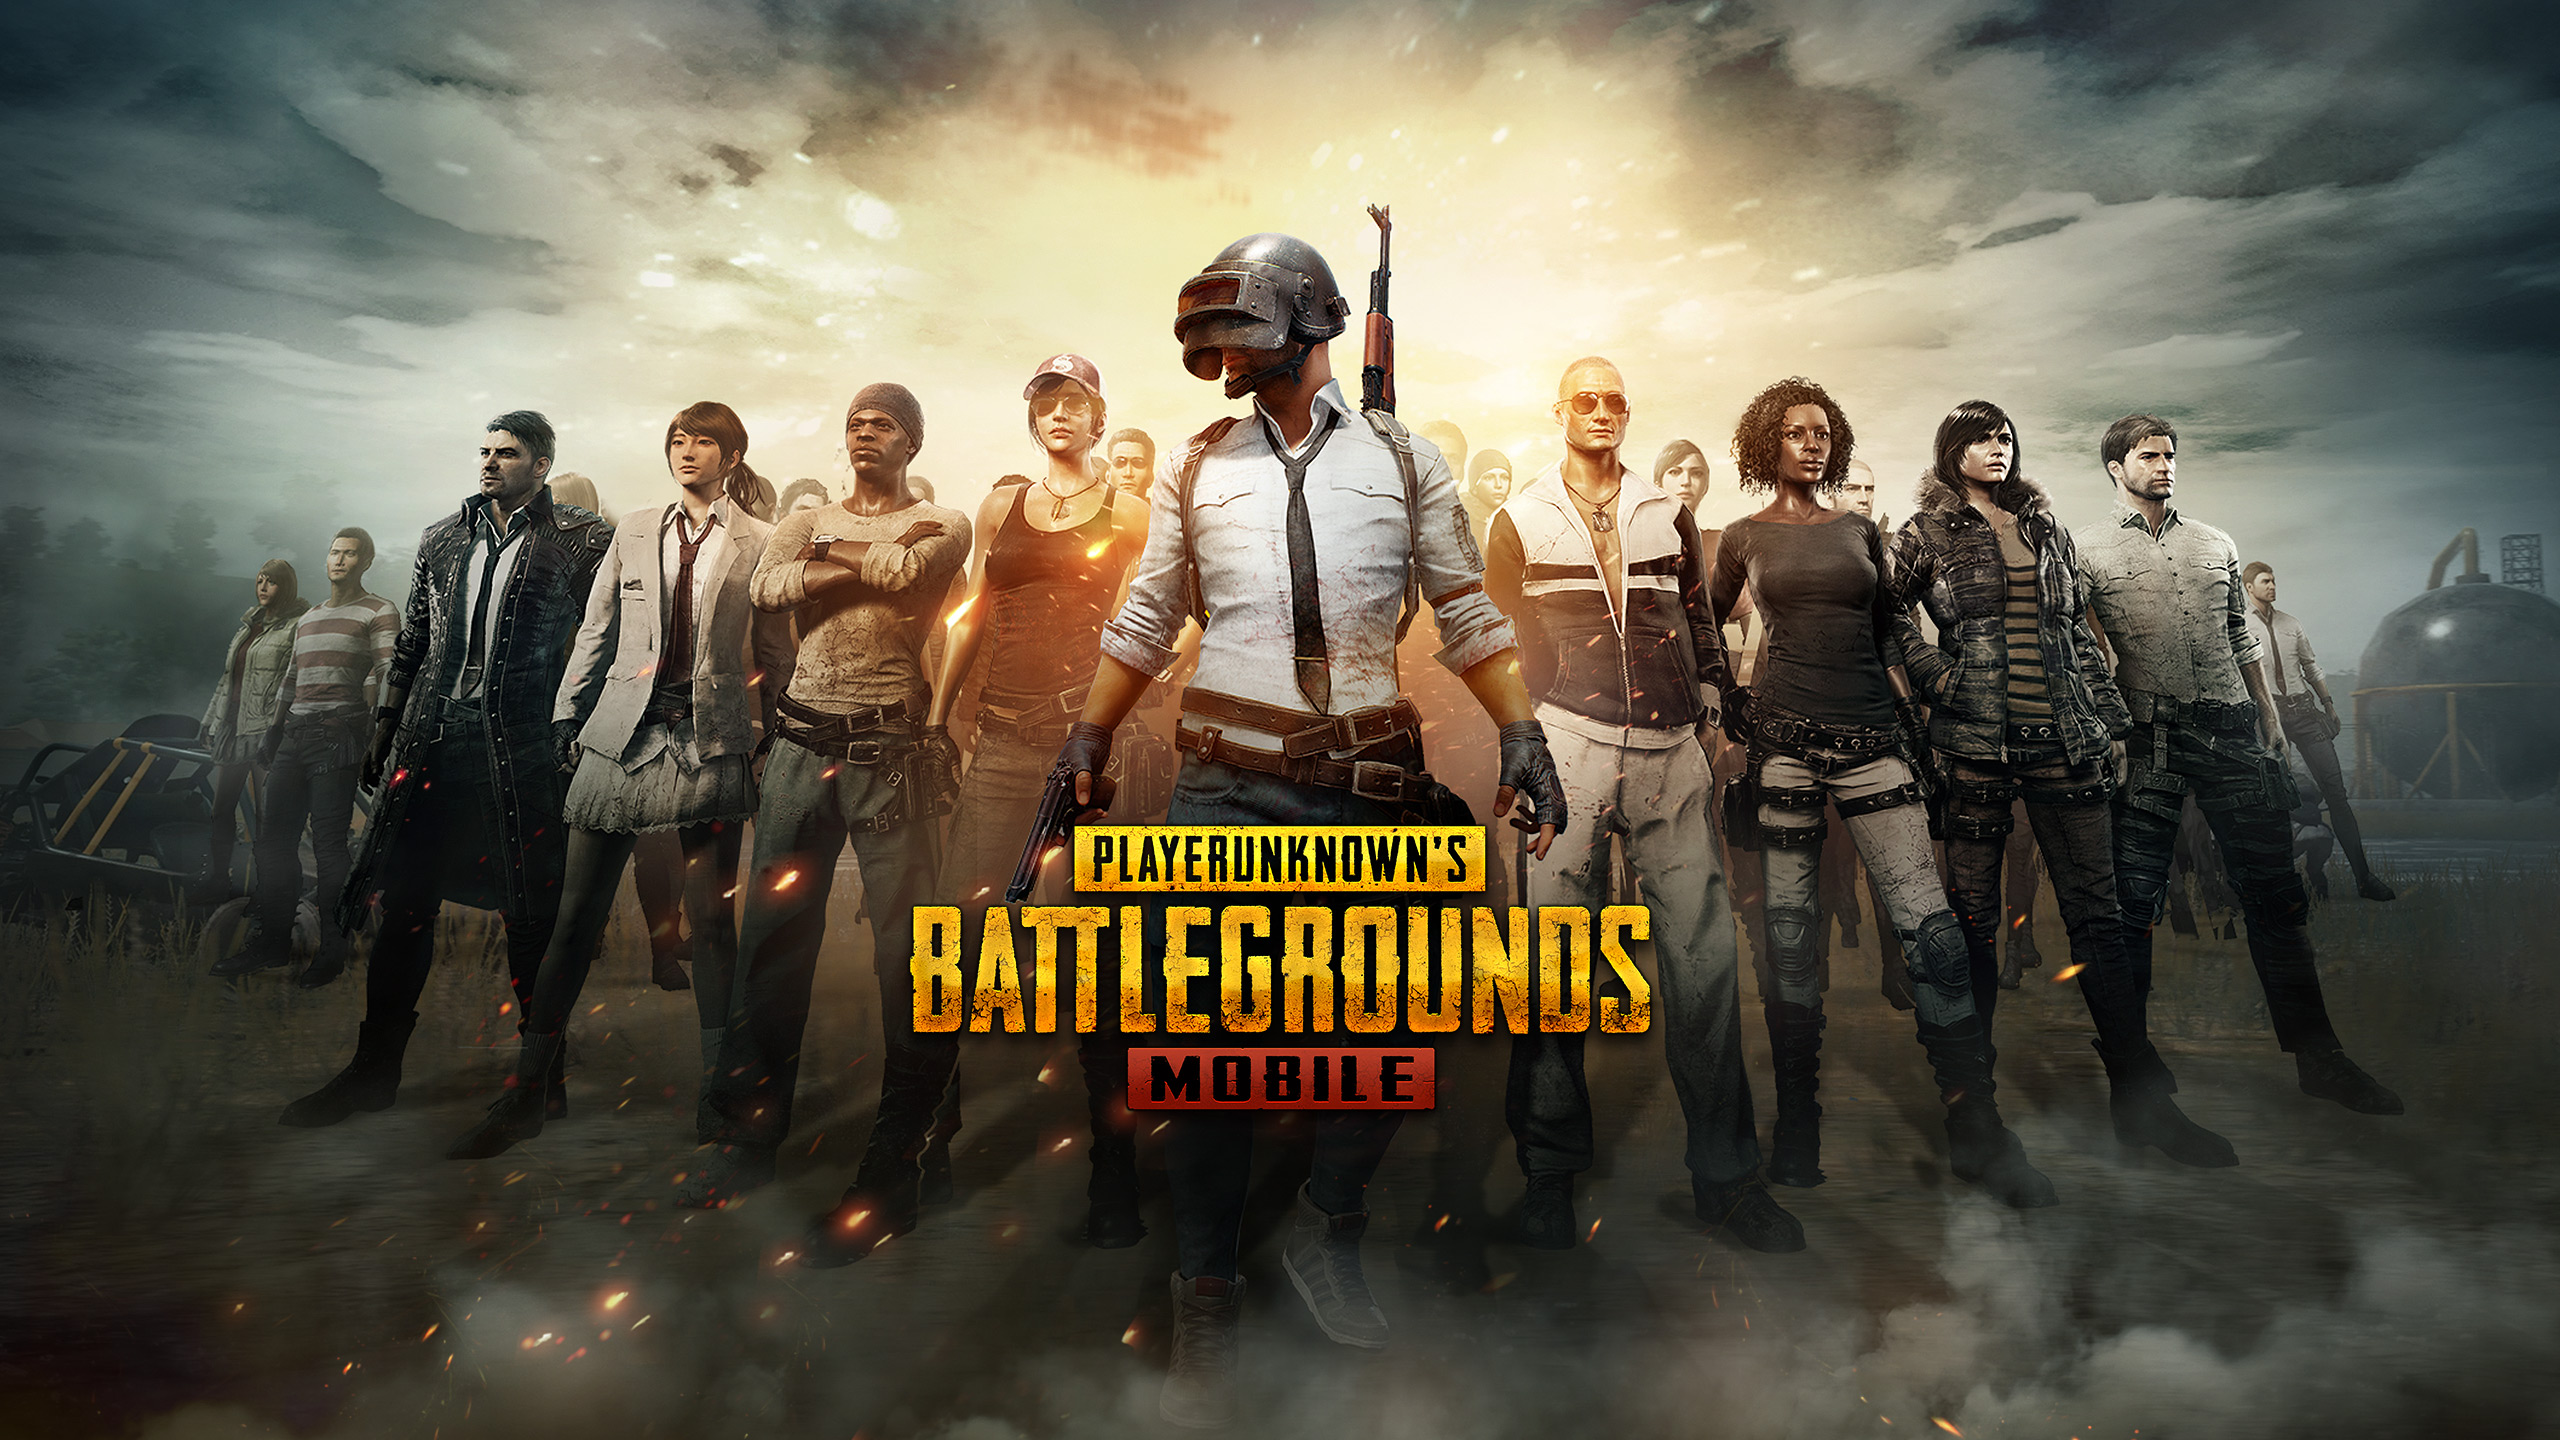 PUBG, banned, India, Chinese apps, Information Technology Act, Ladakh, Galwan Valley clash